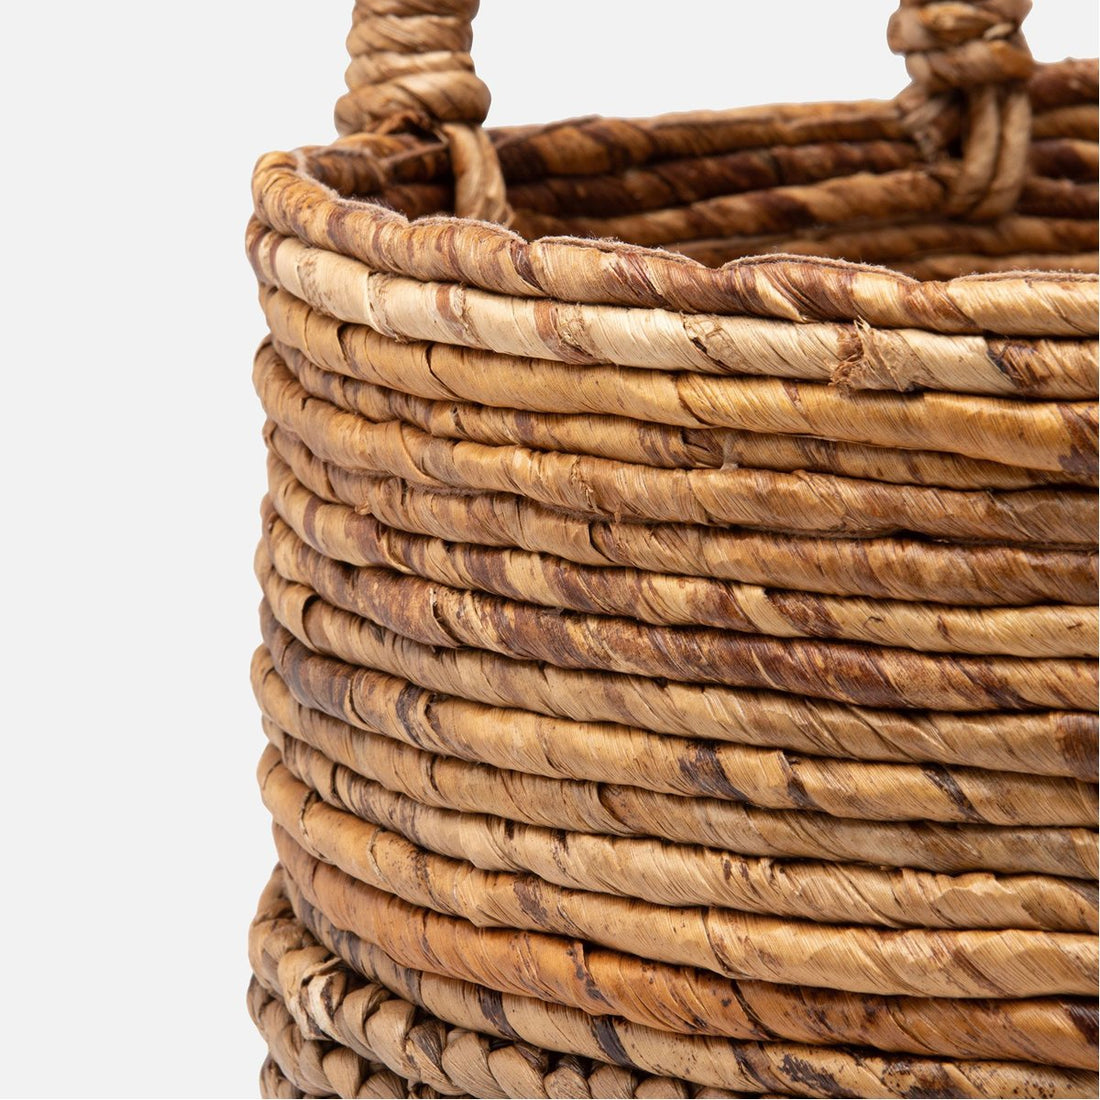 Pigeon and Poodle Payson Round Nested Baskets, 2-Piece Set